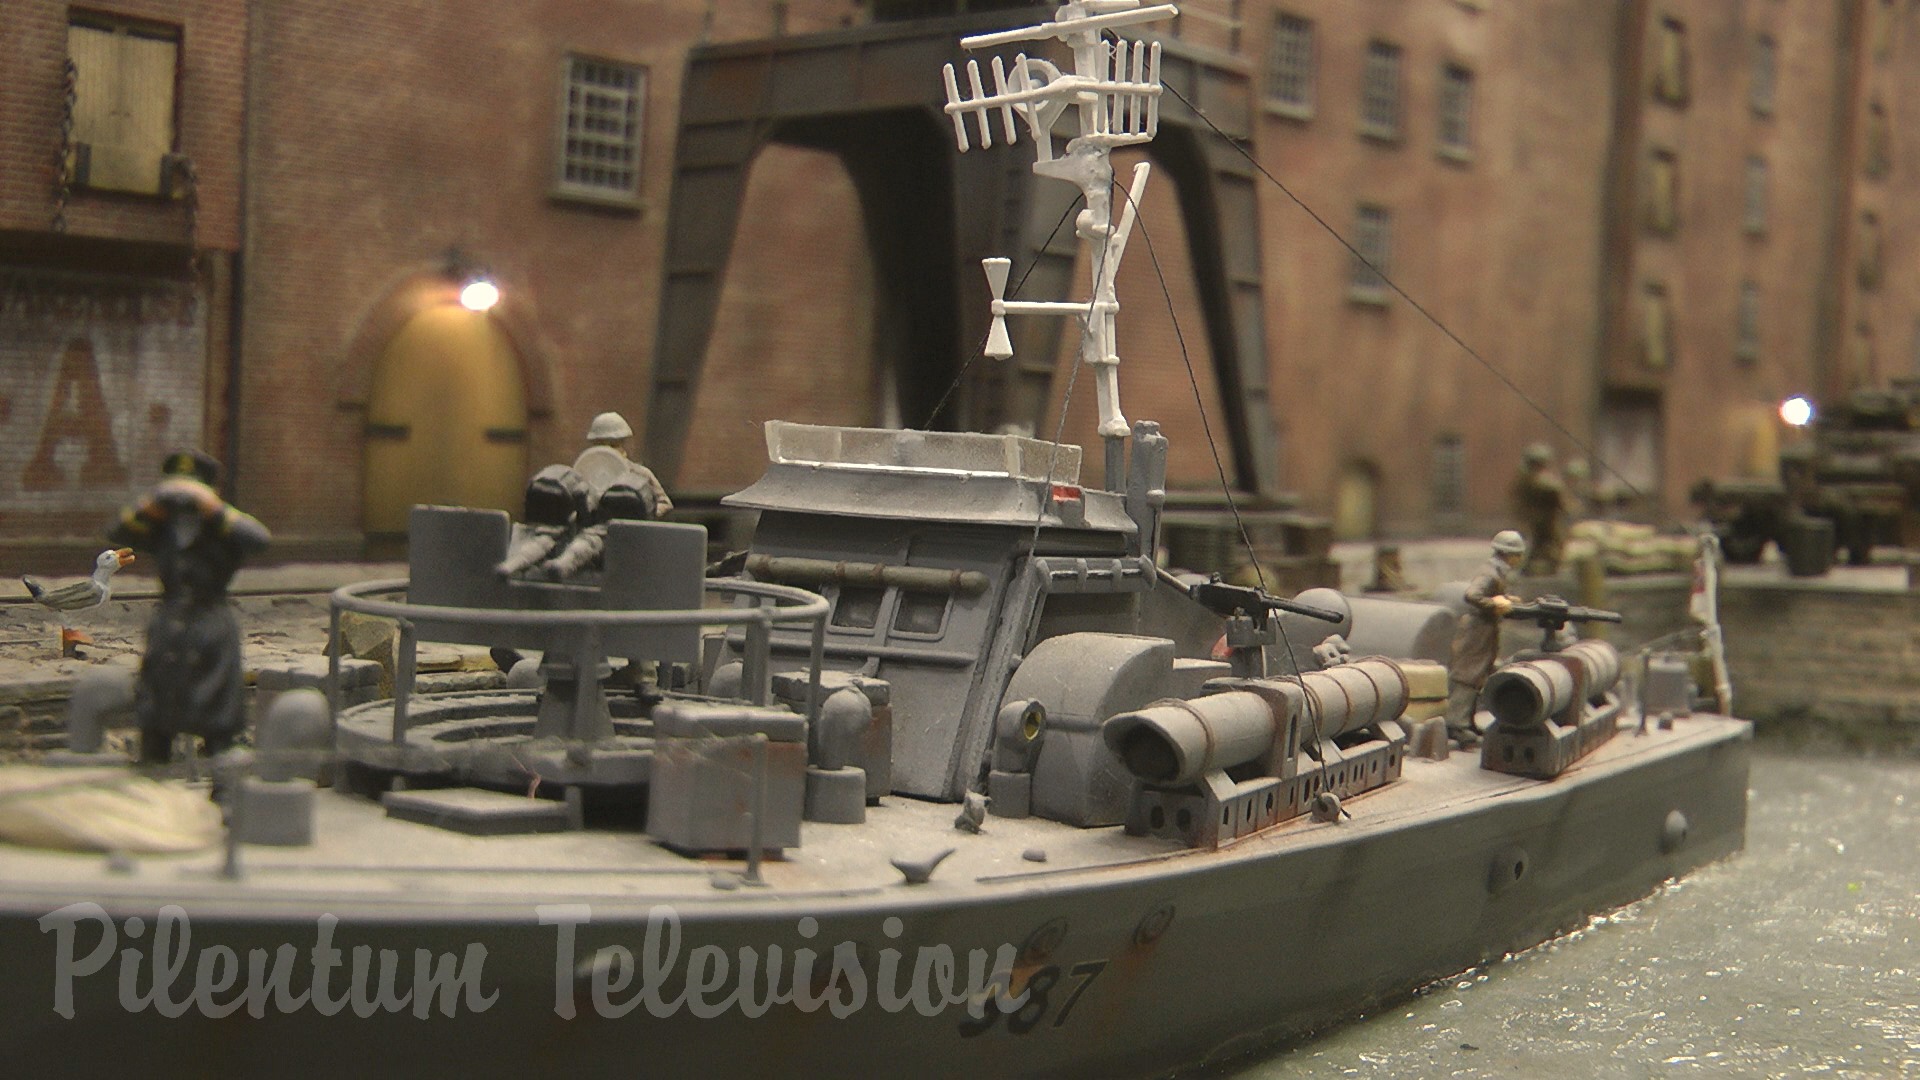 Military Model Trains, Torpedo Boats and Tanks: The Second World War Dockside Diorama “Operation Abyss” by James Styles